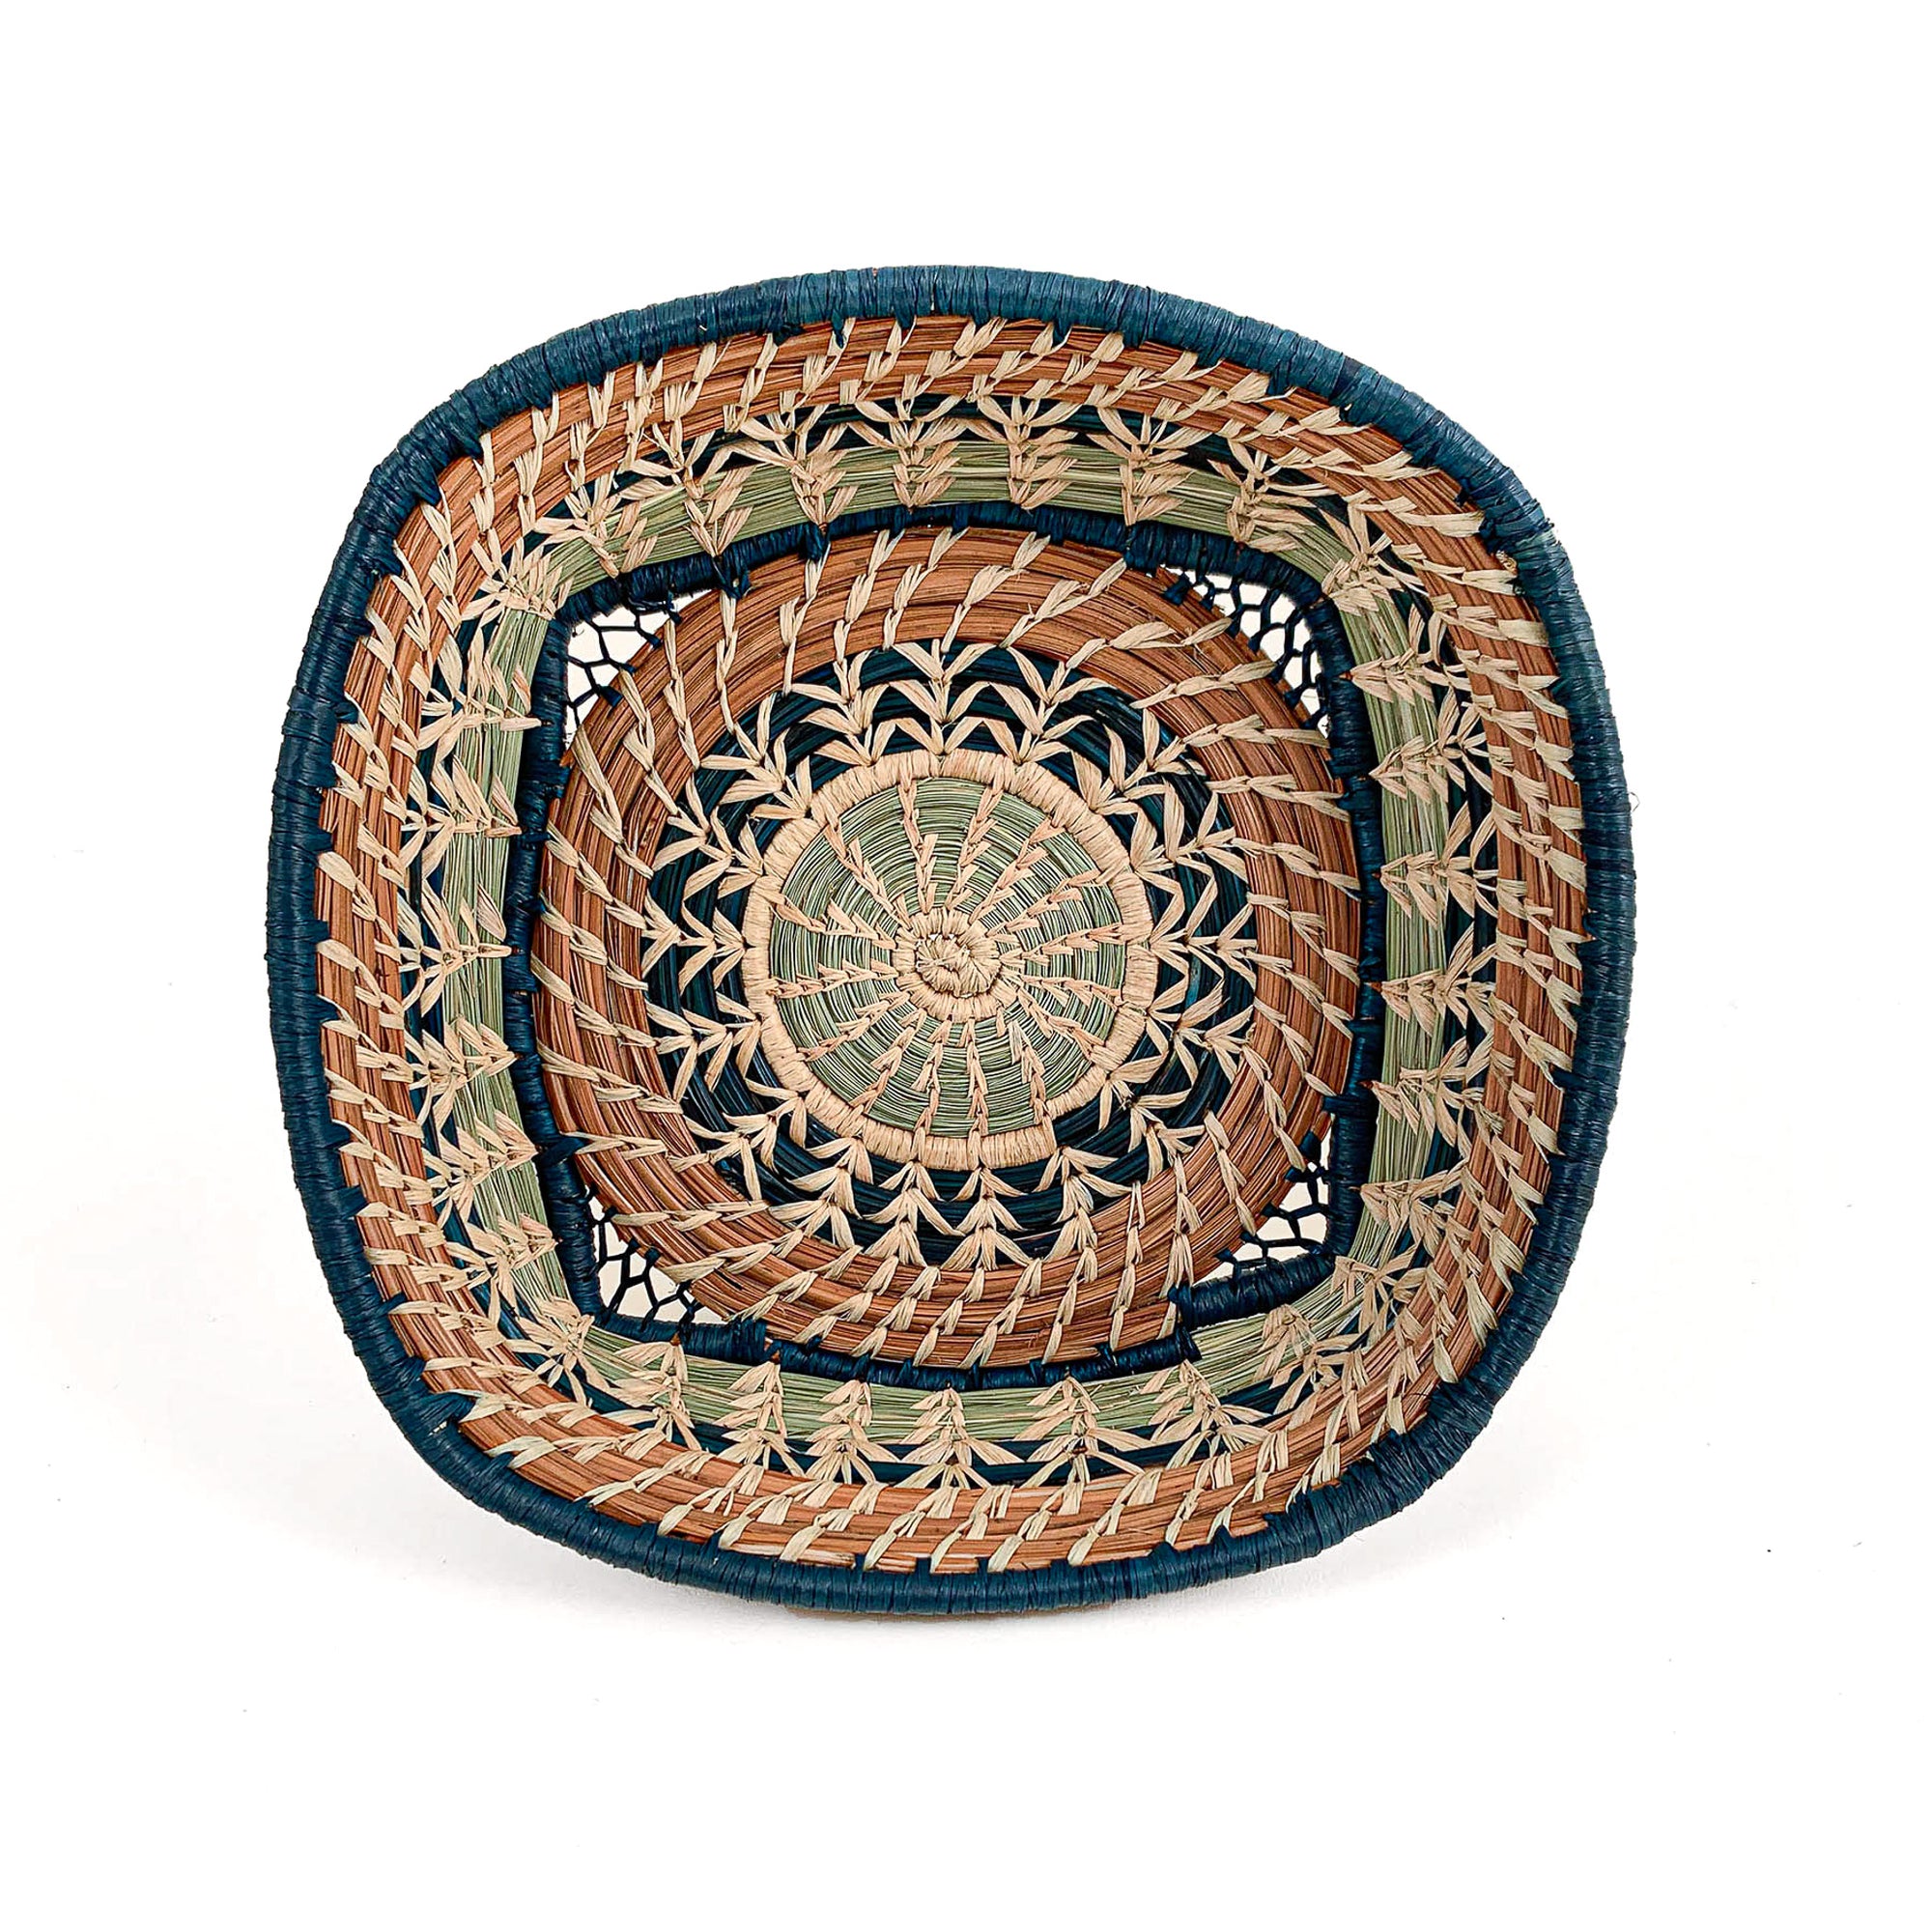 Square basket with circular center in blues and browns